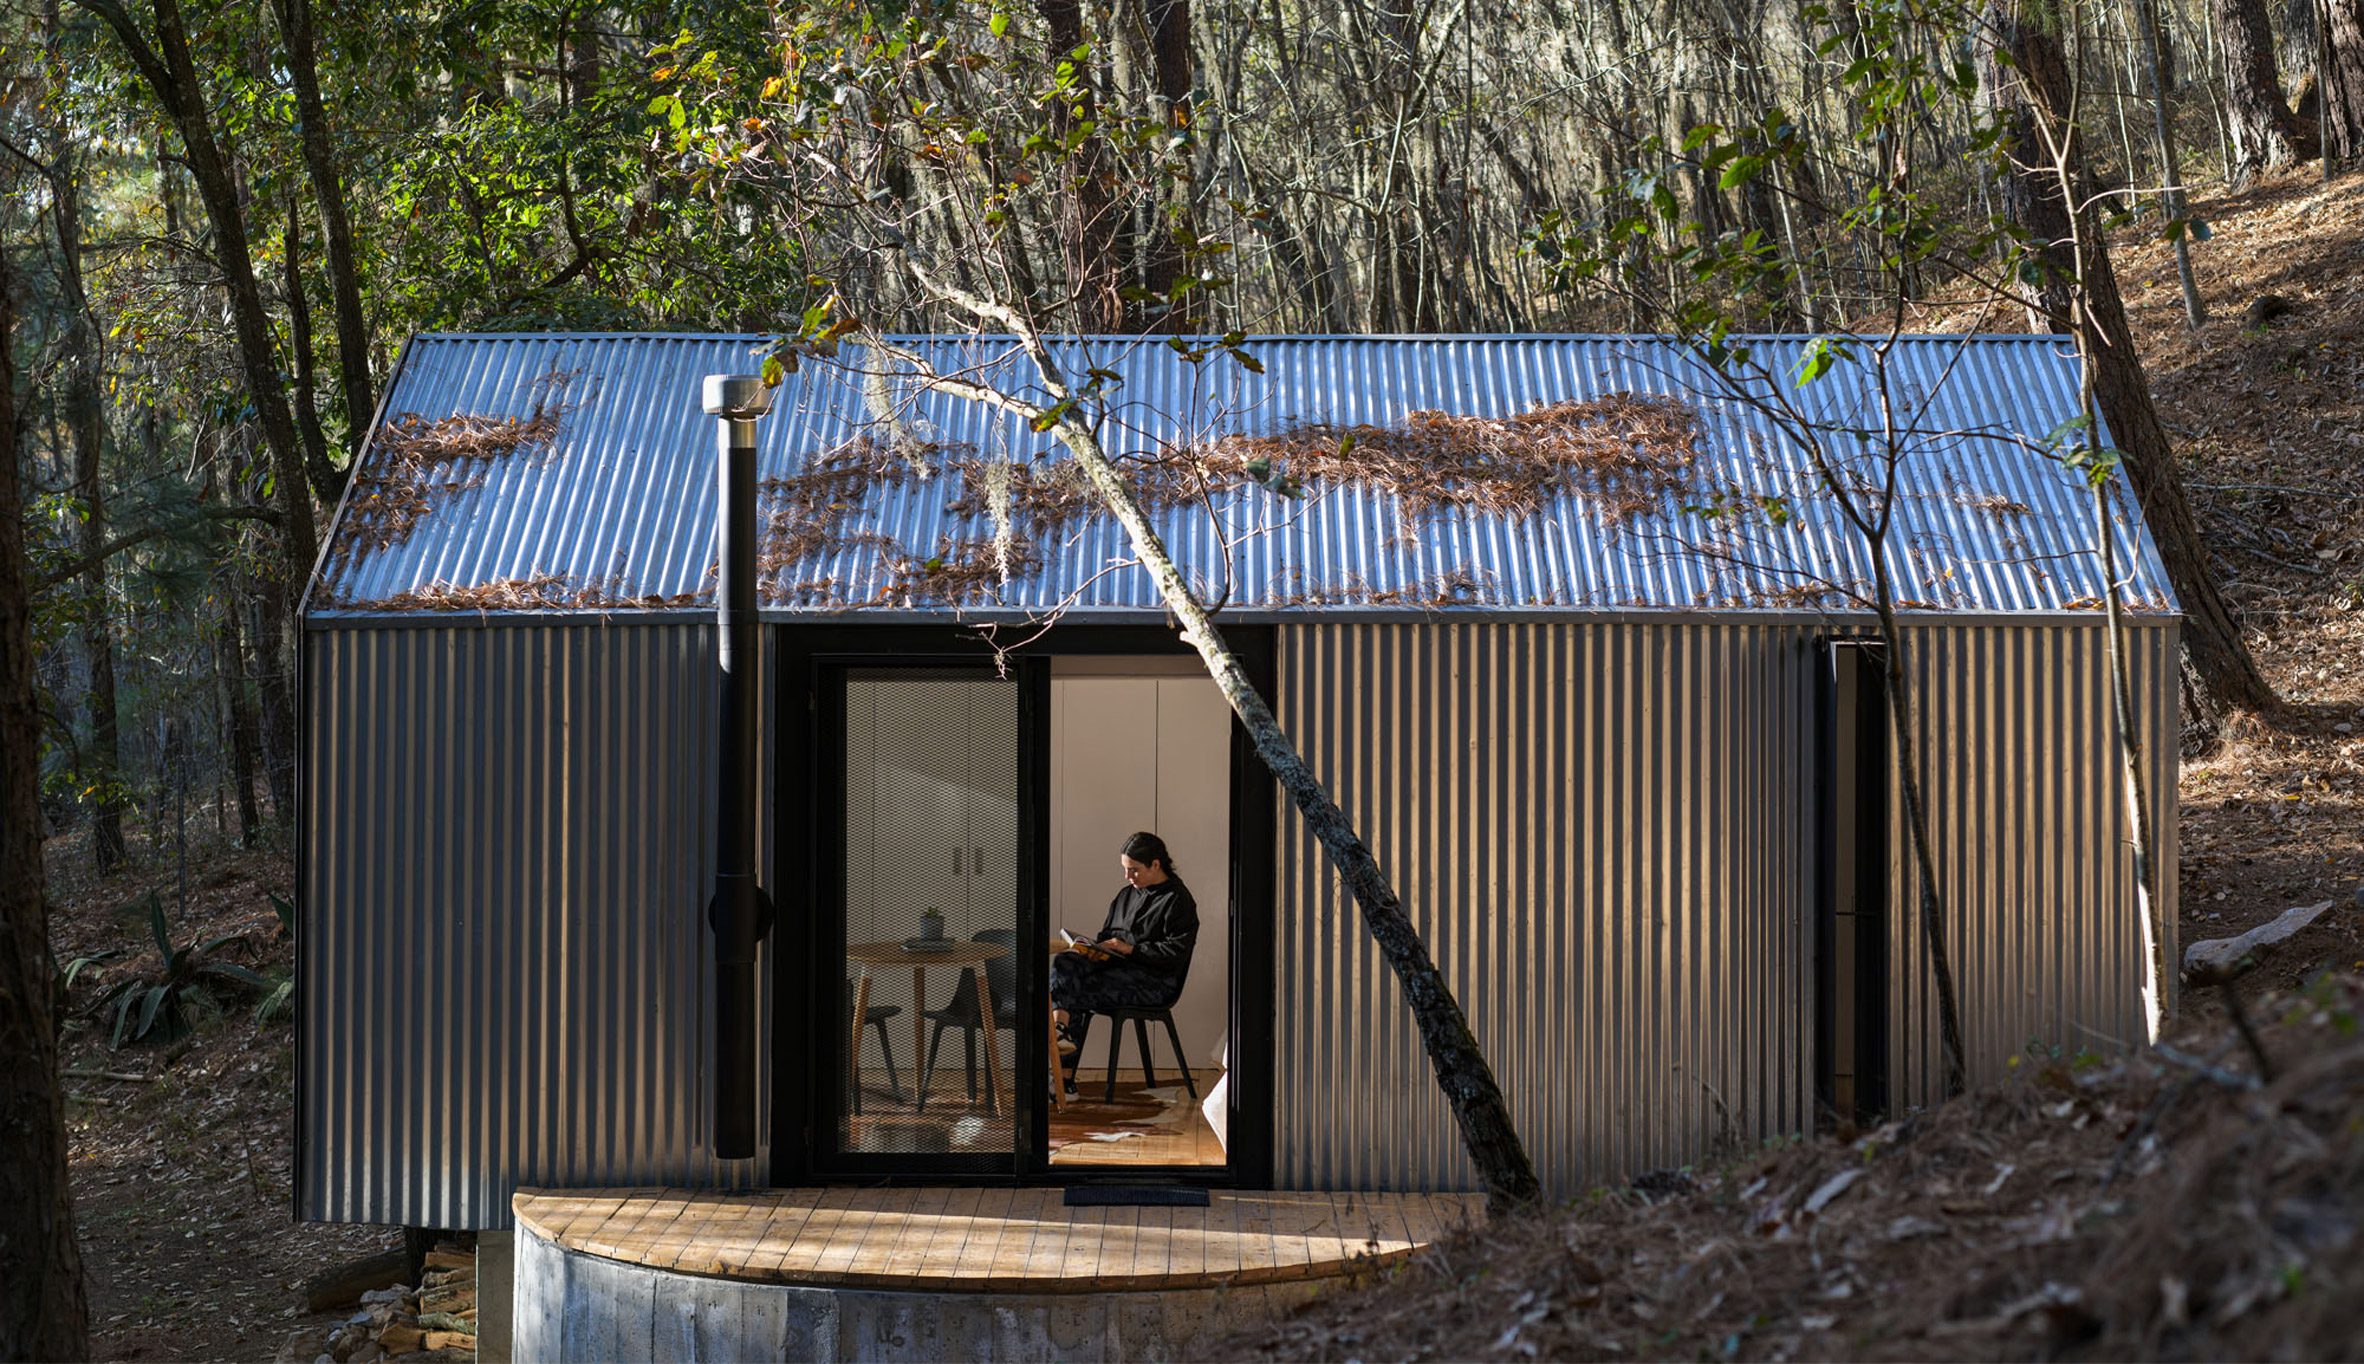 S-AR creates deconstructed house for glamping in the Mexican forest